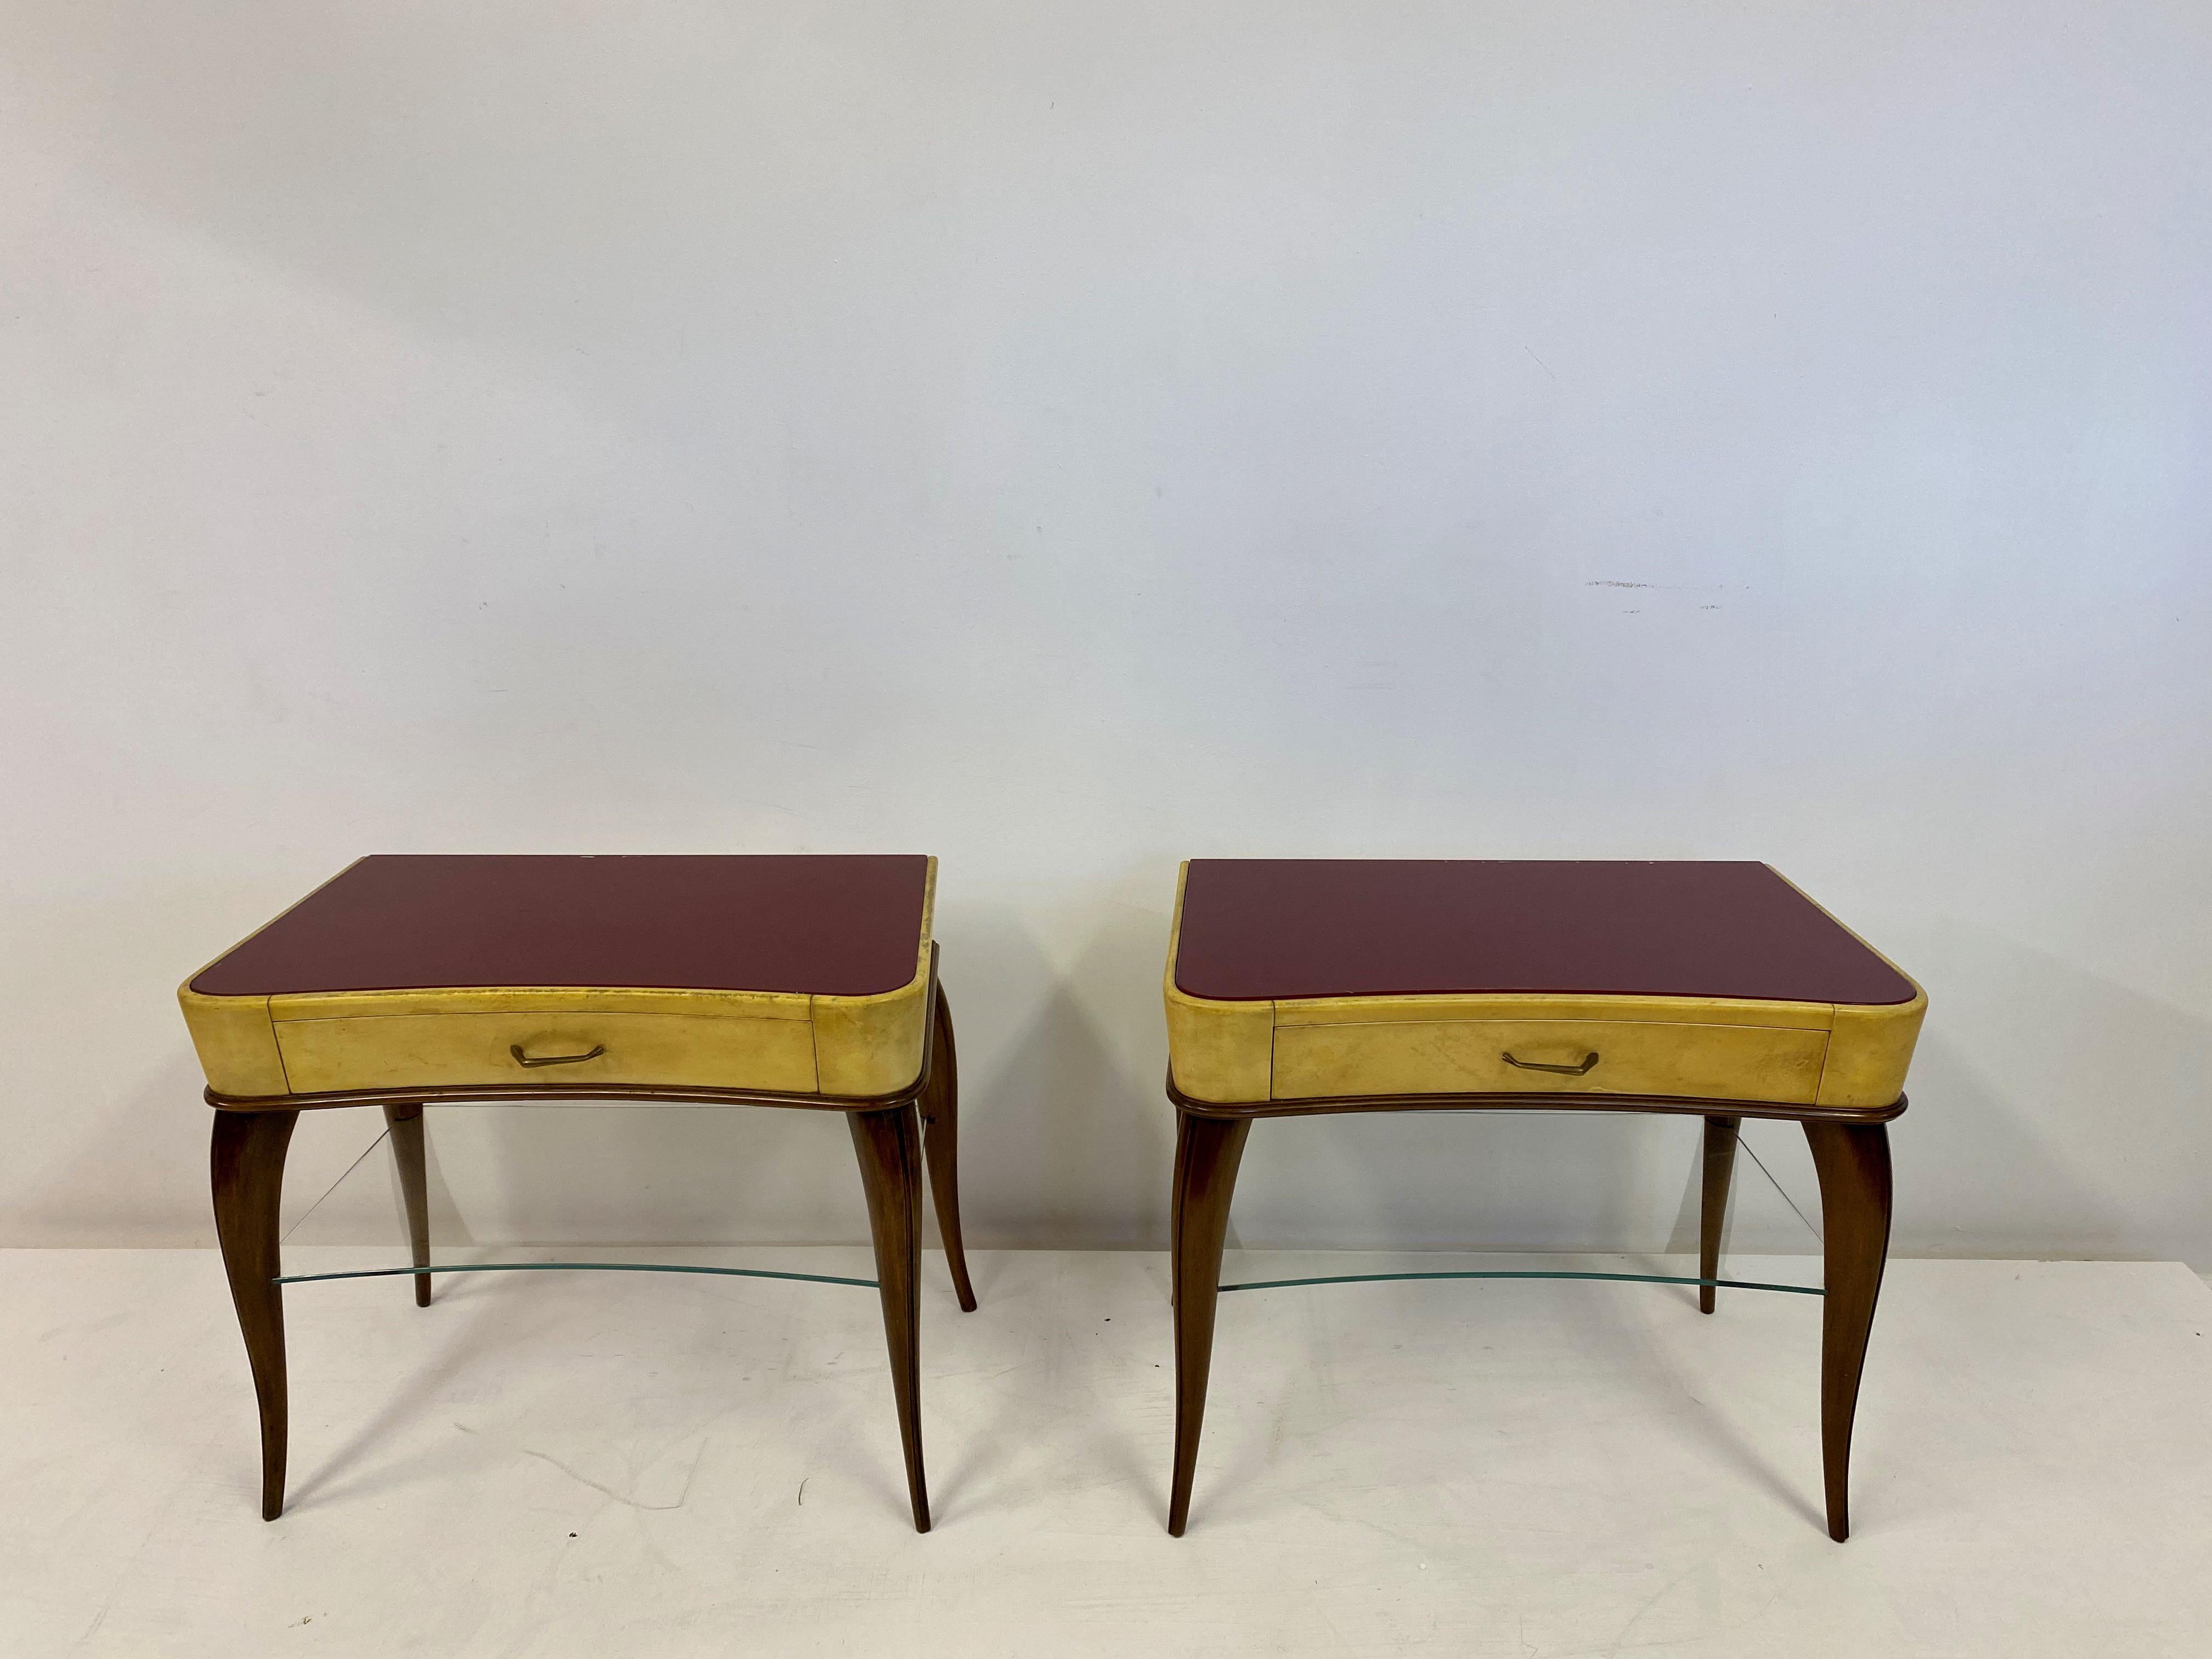 A pair of bedside tables

Red glass tops

Brass handles

Wood frame

Glass shelf

Parchment body

Italy, 1950s.
 